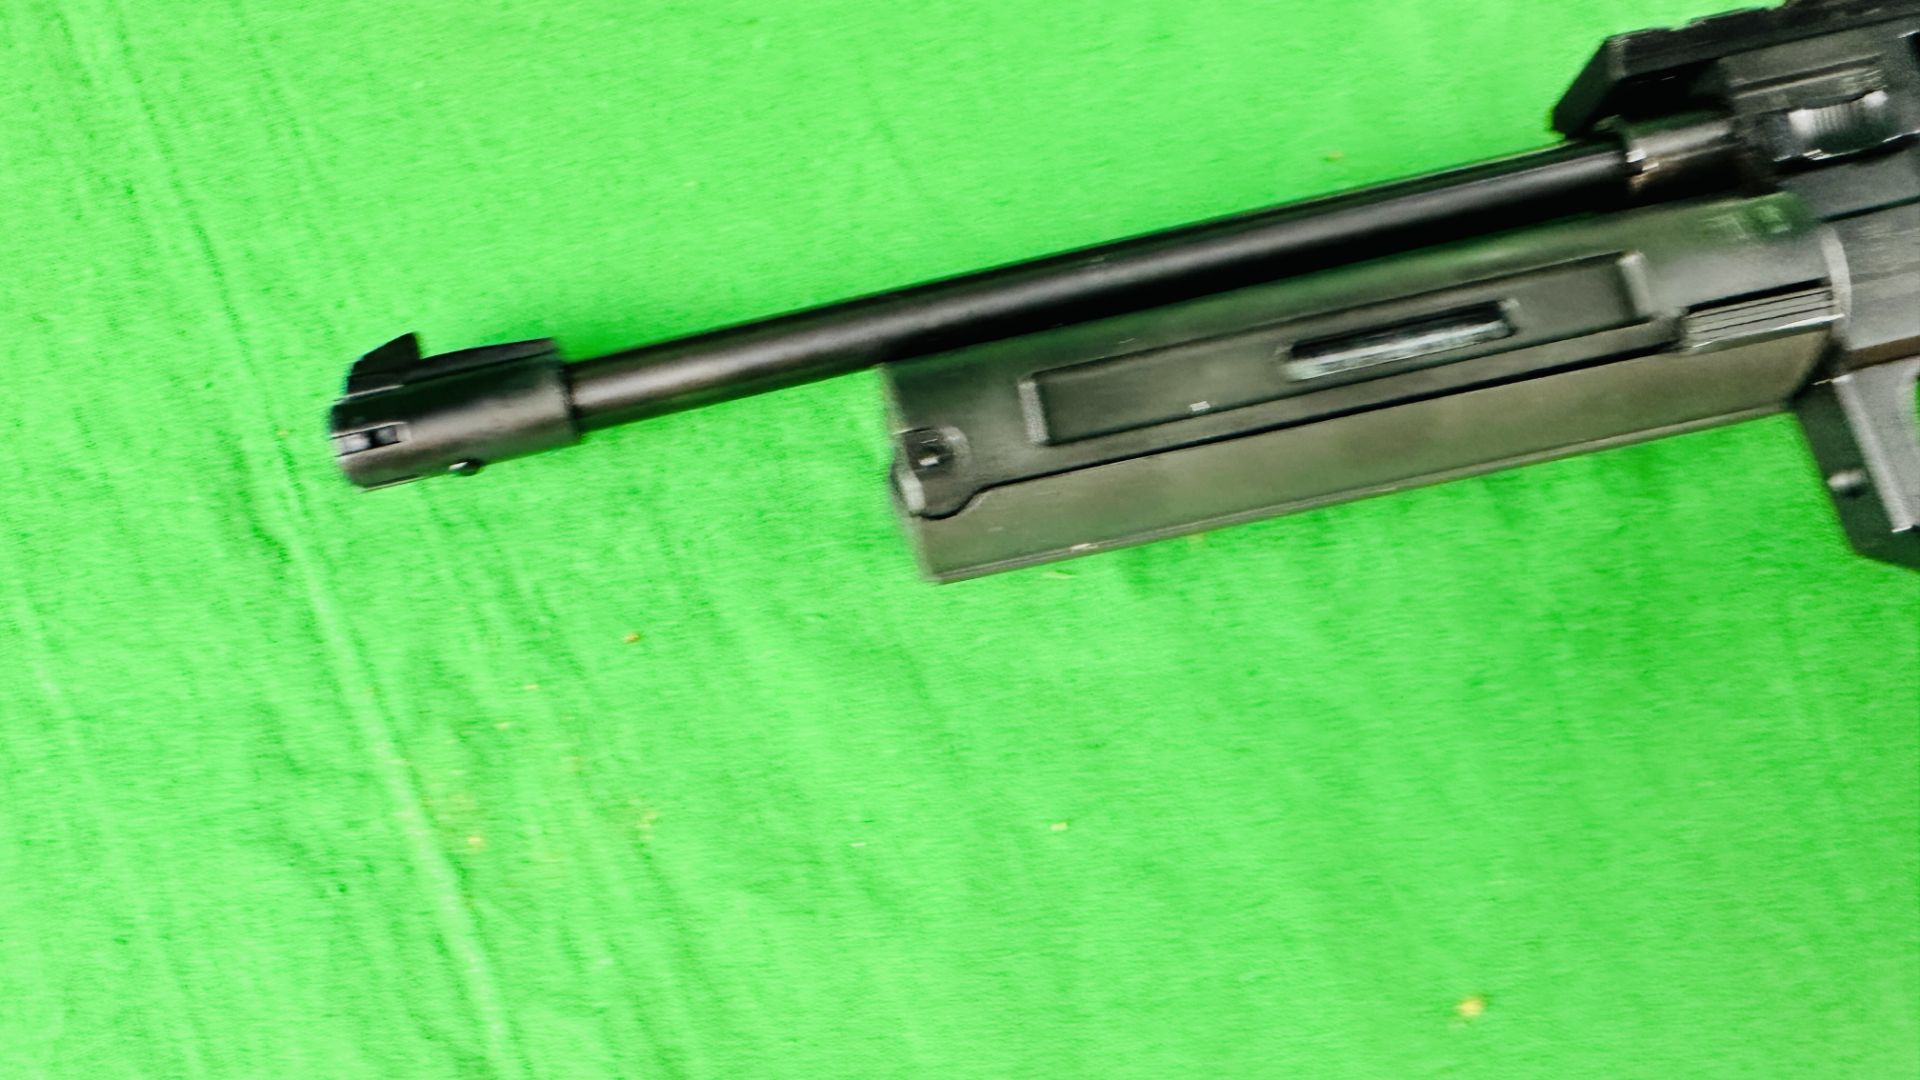 ROHM TWIN MASTER ACTION Co2 AIR PISTOL COMPLETE WITH ONE 8 SHOT MAGAZINE AND A ROHM SILENCER IN - Image 8 of 11